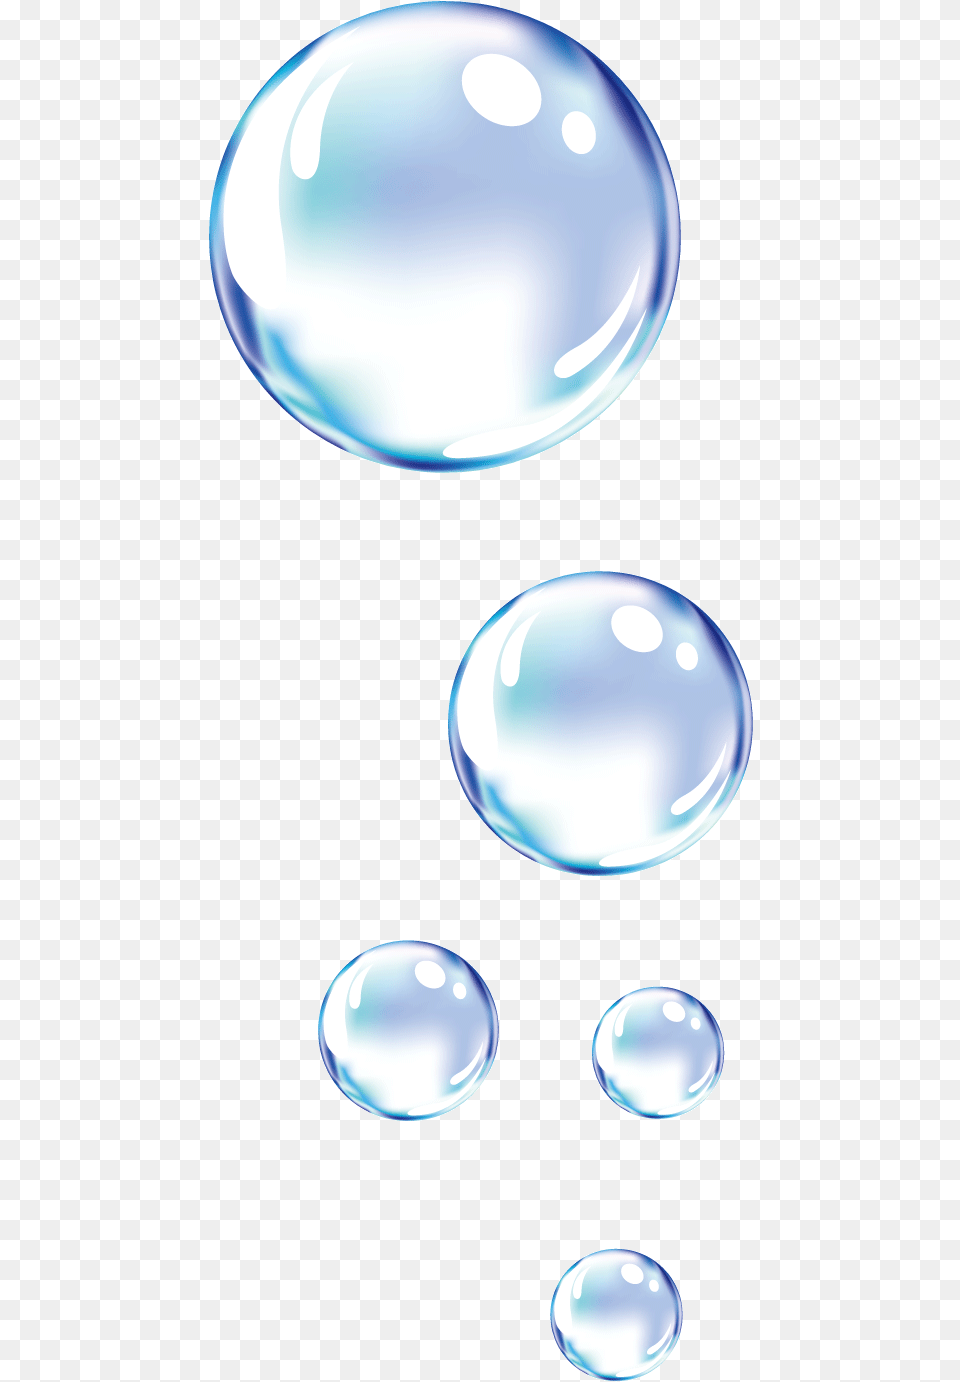 Water Bubble Vector Dynamic Droplets Free Bubbles, Sphere, Astronomy, Moon, Nature Png